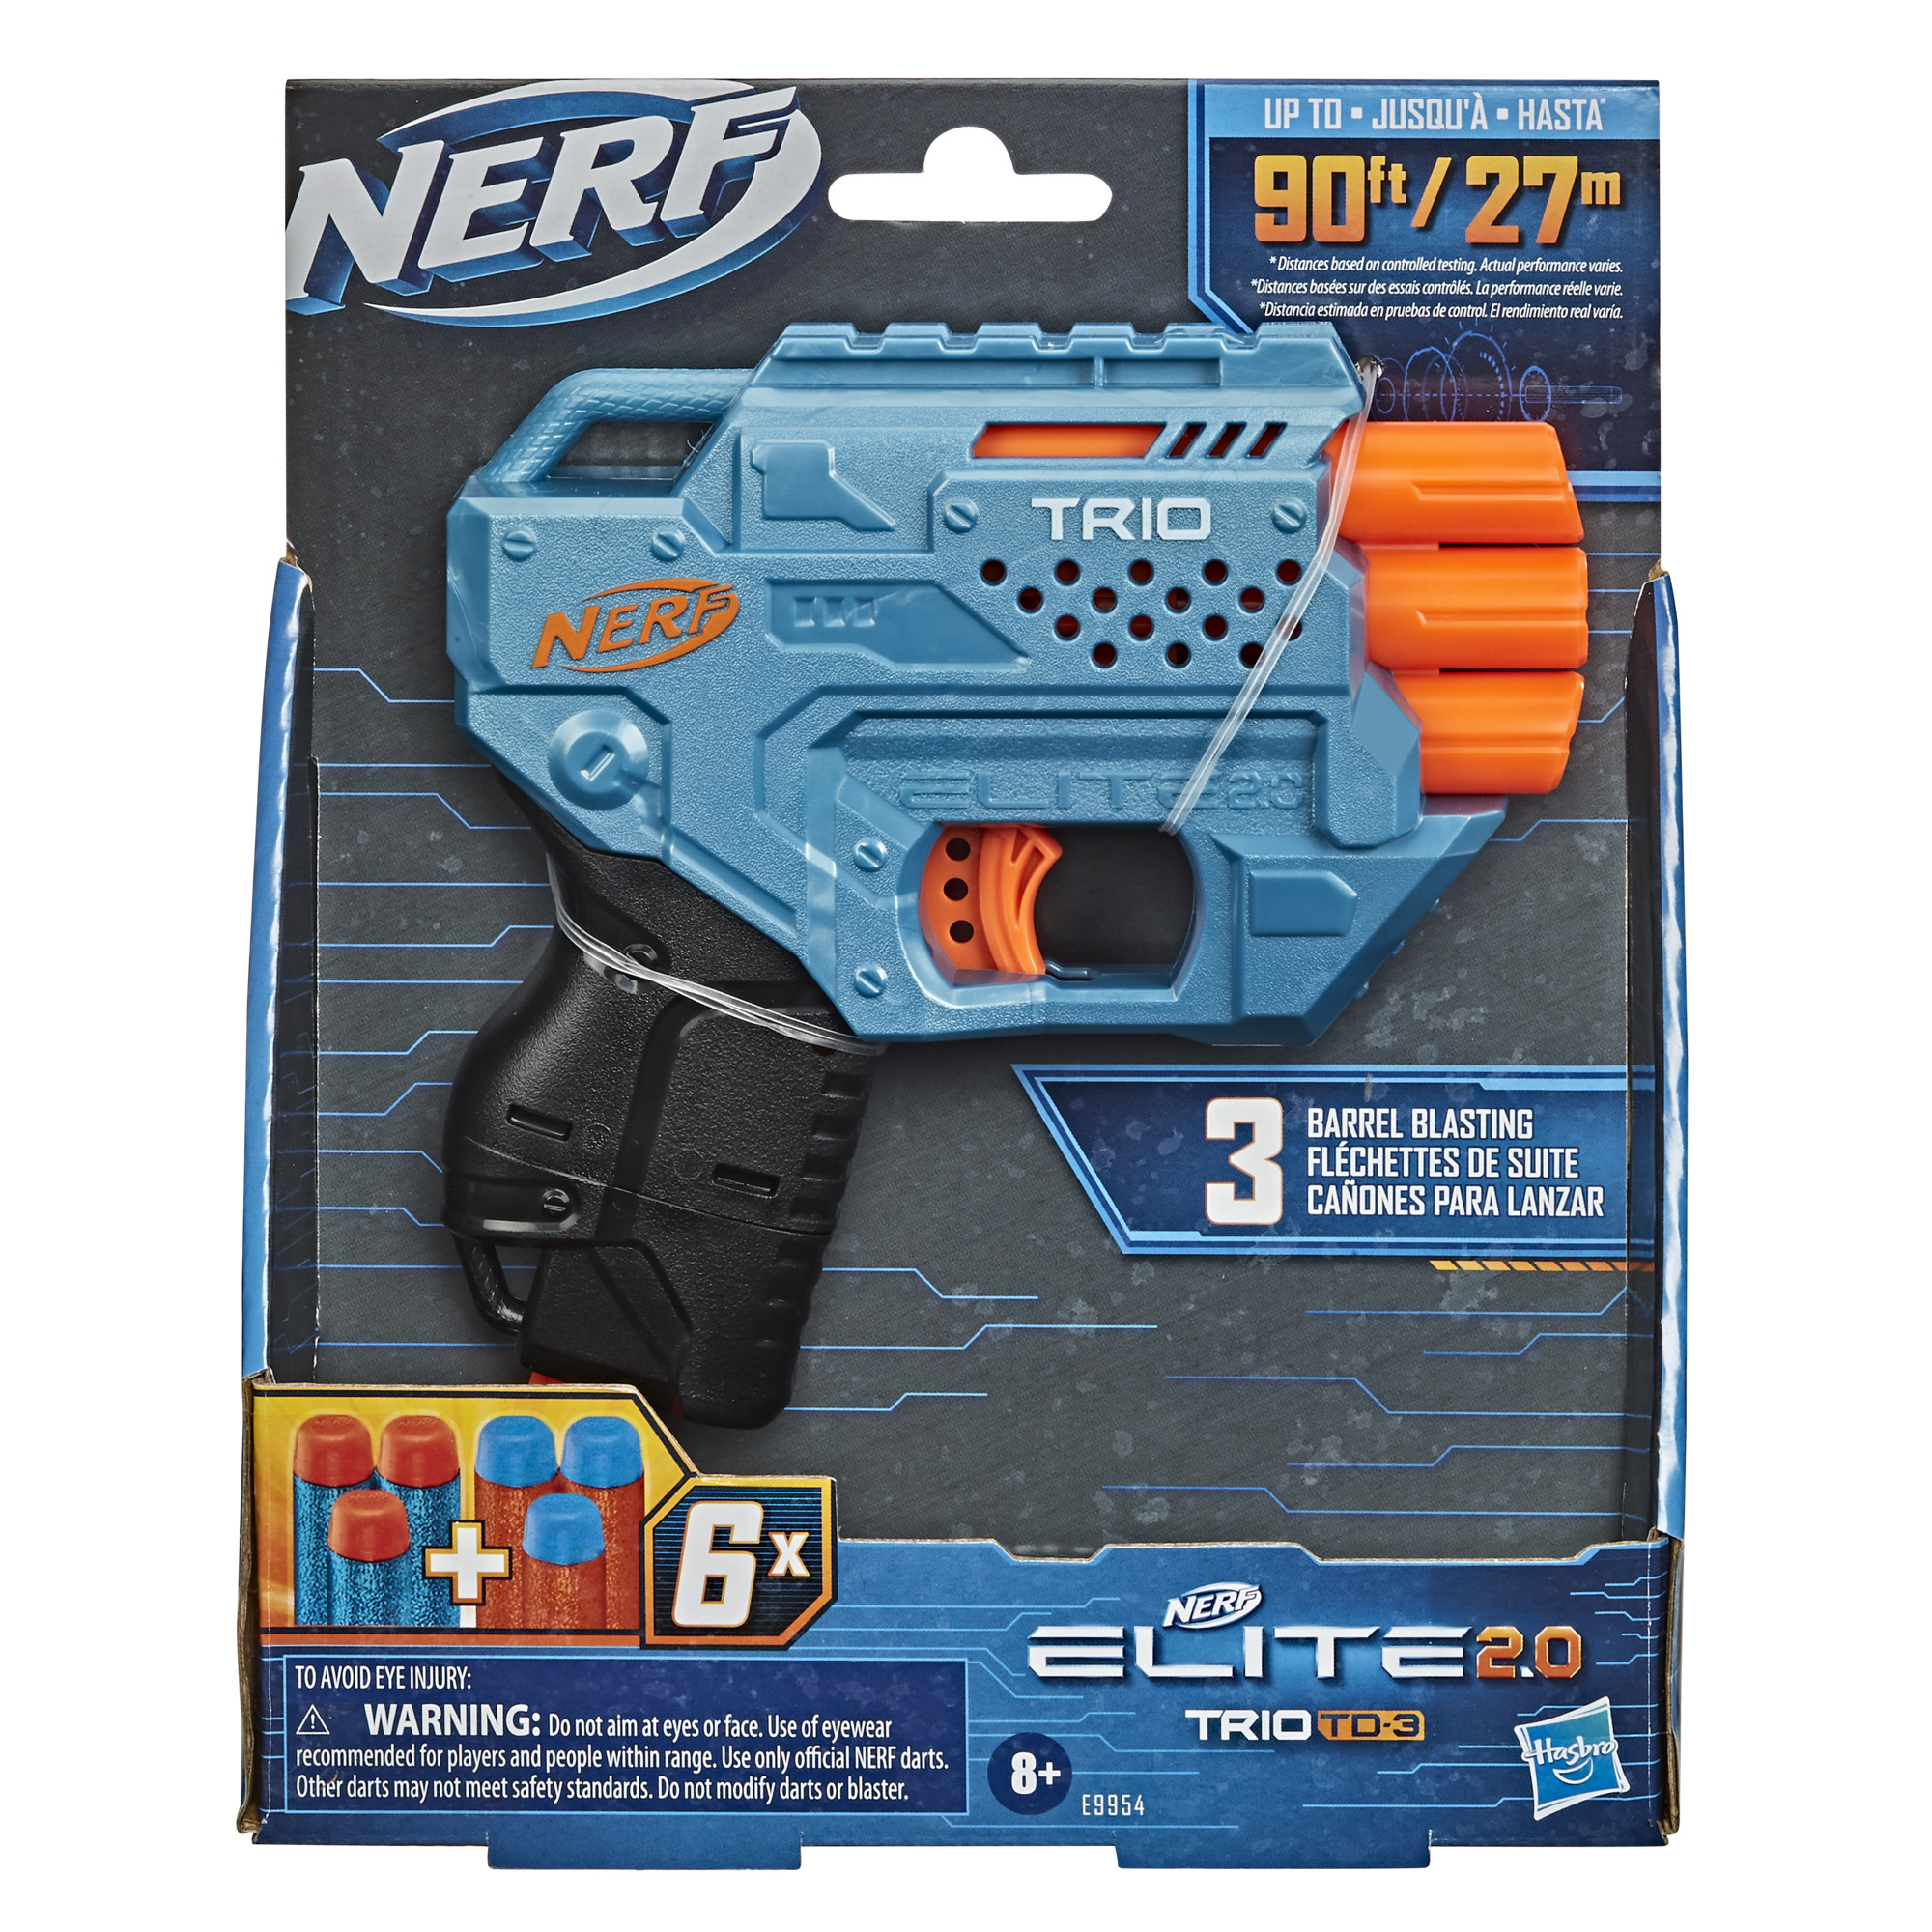 Nerf Elite 2.0 Trio SD-3, Includes 6 Official Nerf Darts